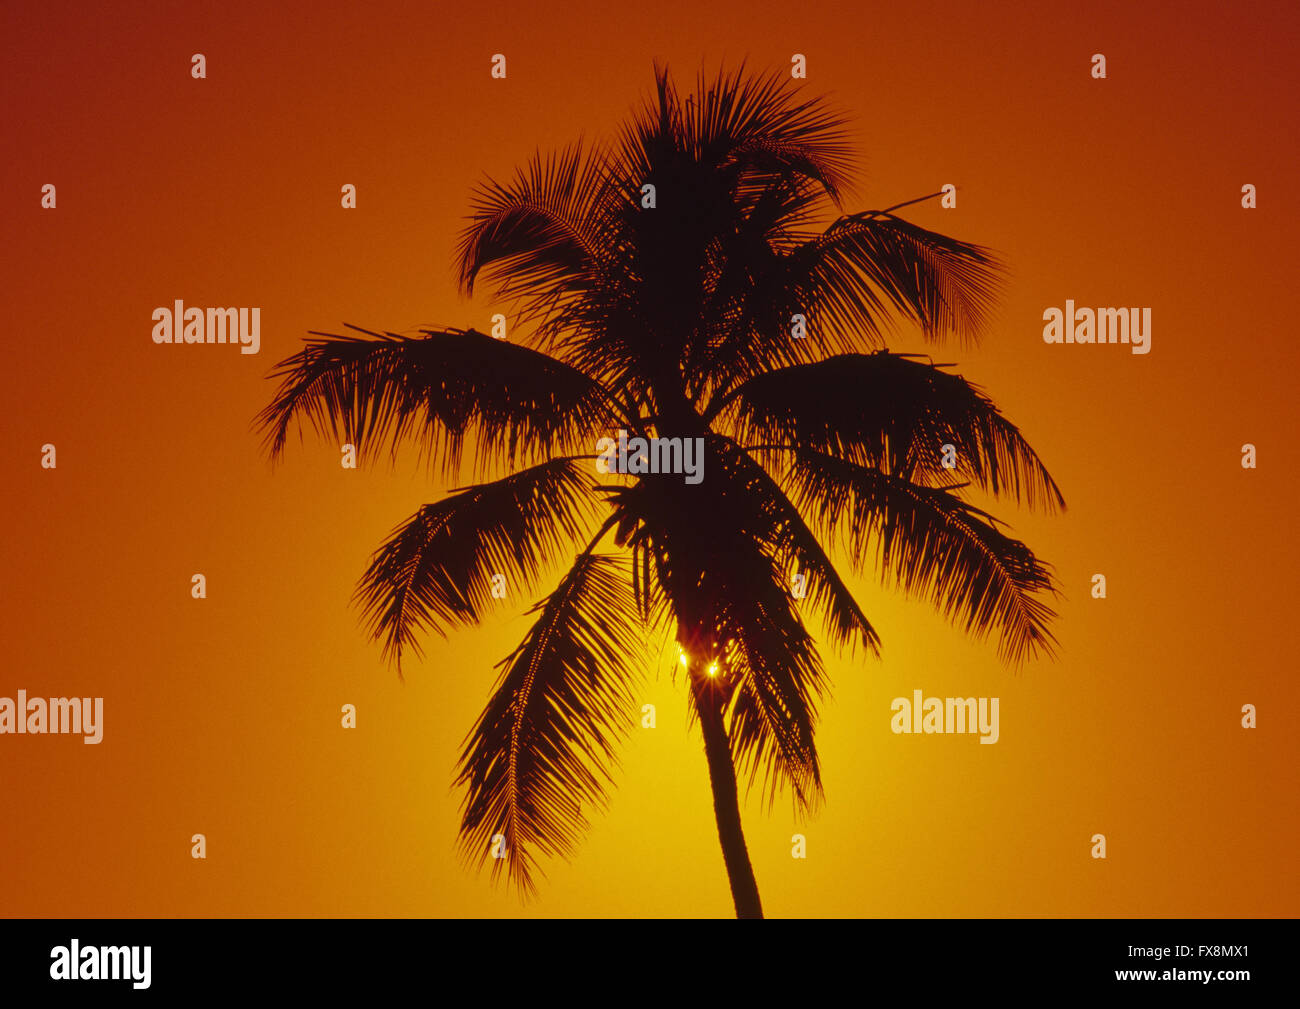 A coconut palm tree with the sun behind an orange sky Stock Photo